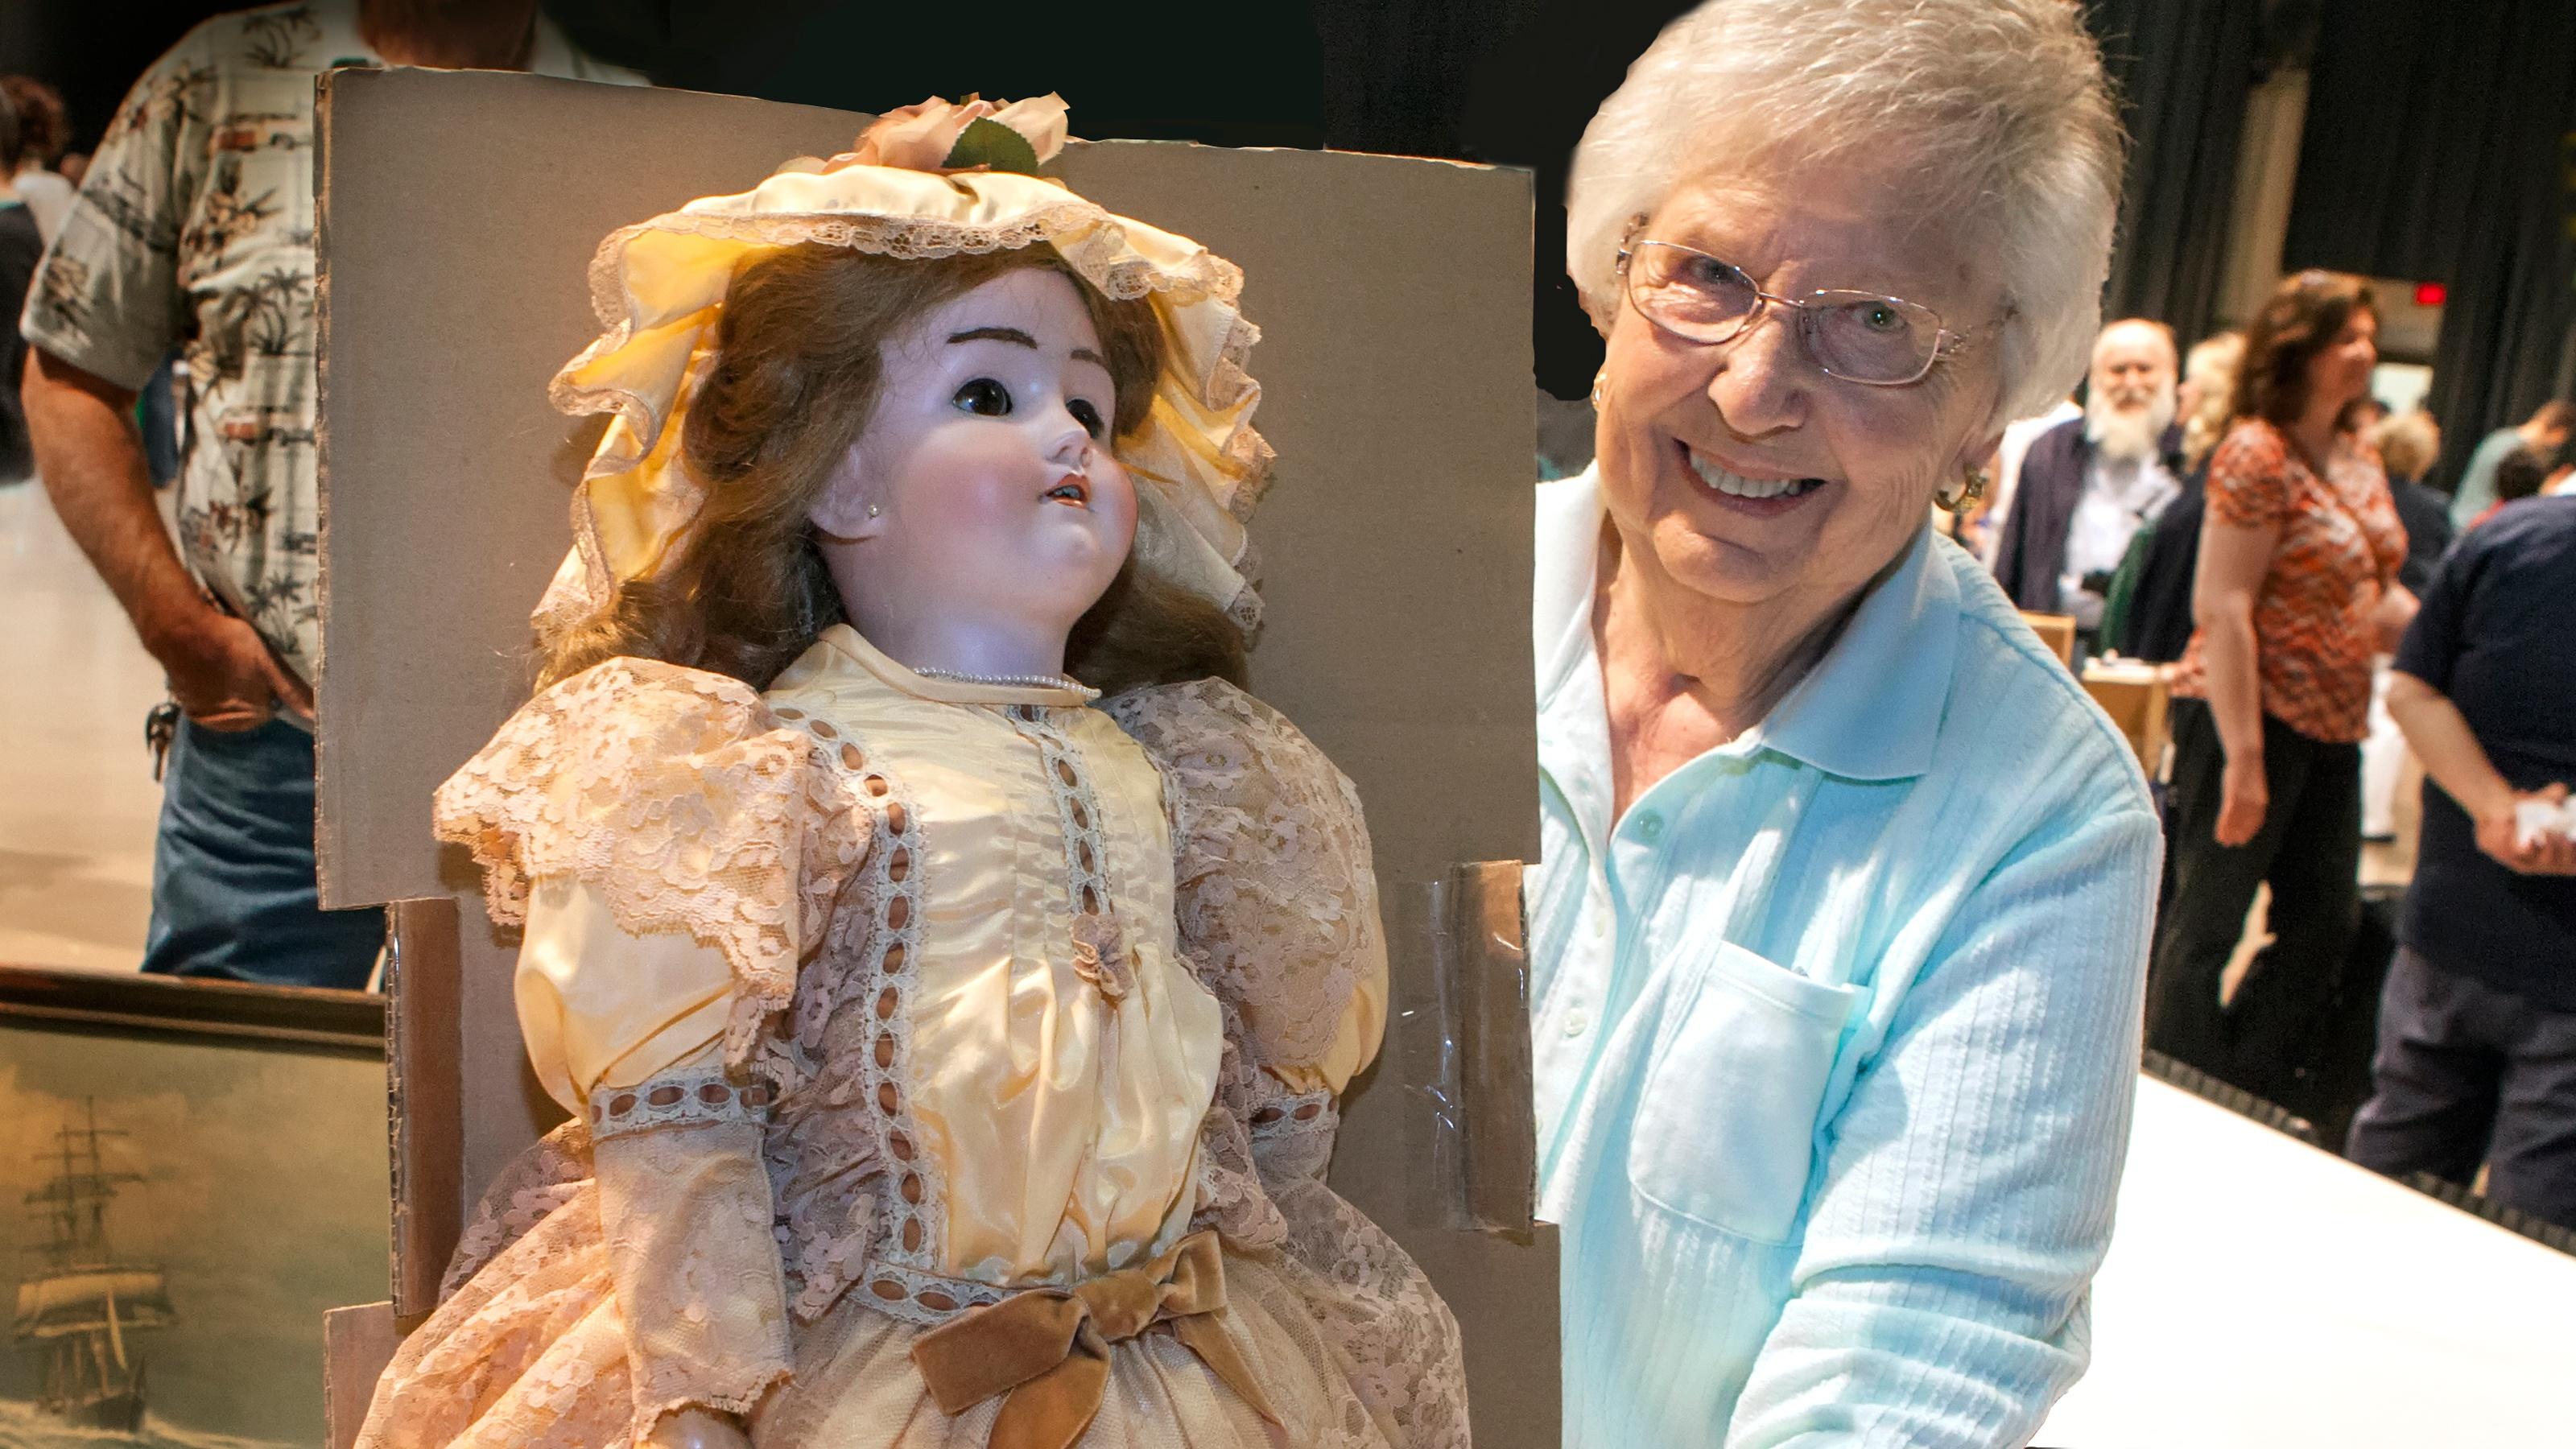 With that smile on her face, it appears she may have gotten some good news about the value of her antue doll at the WNED | WBFO Antiques Home Show